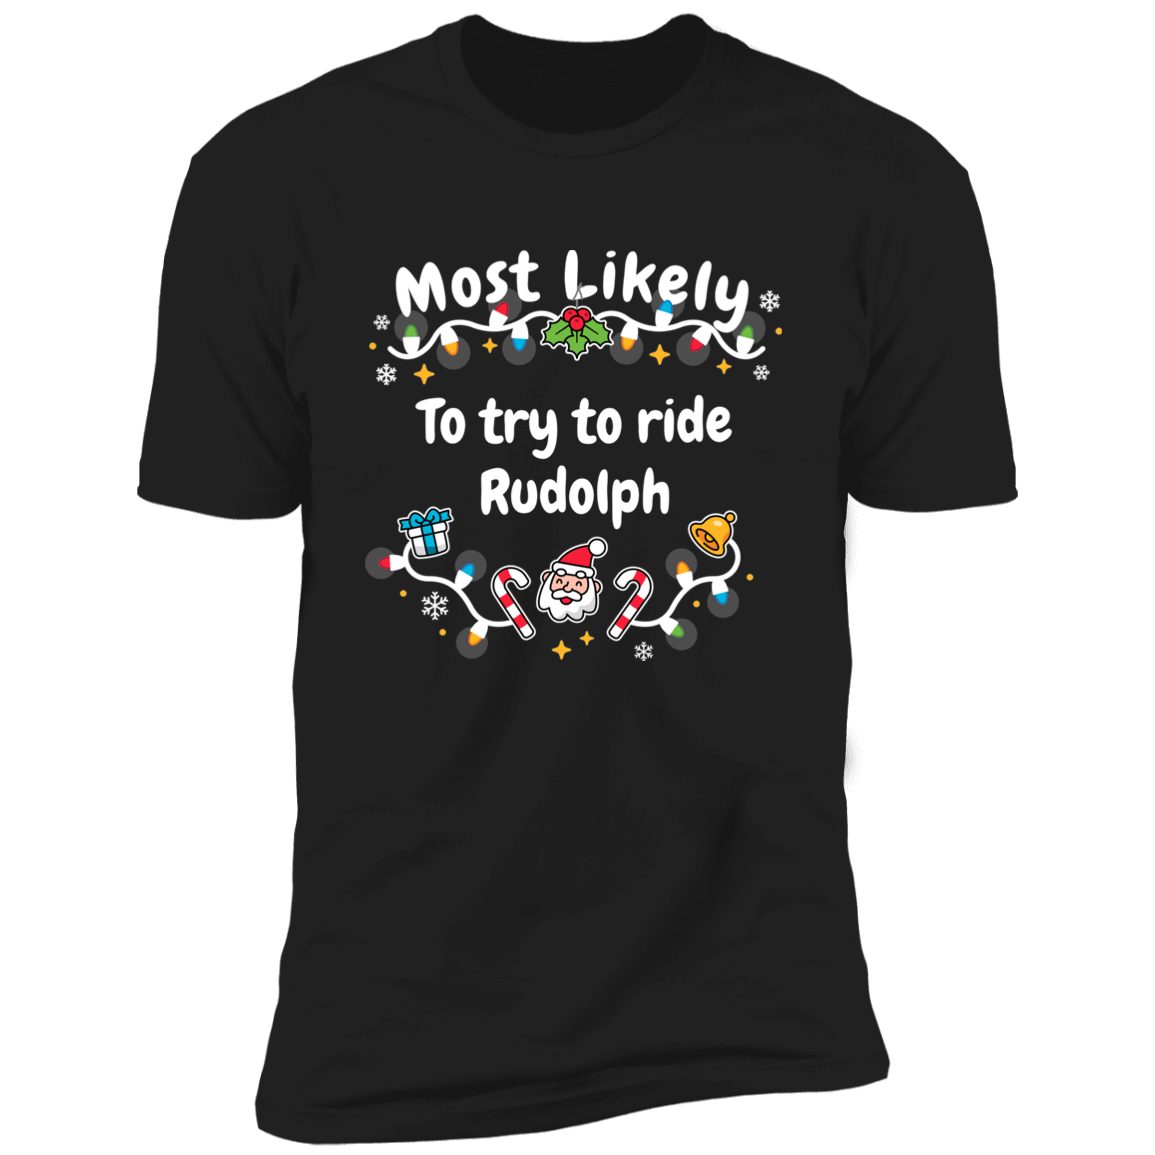 Most Likely To try To Ride Rudolph & Rudolph Black Deluxe Unisex Tees